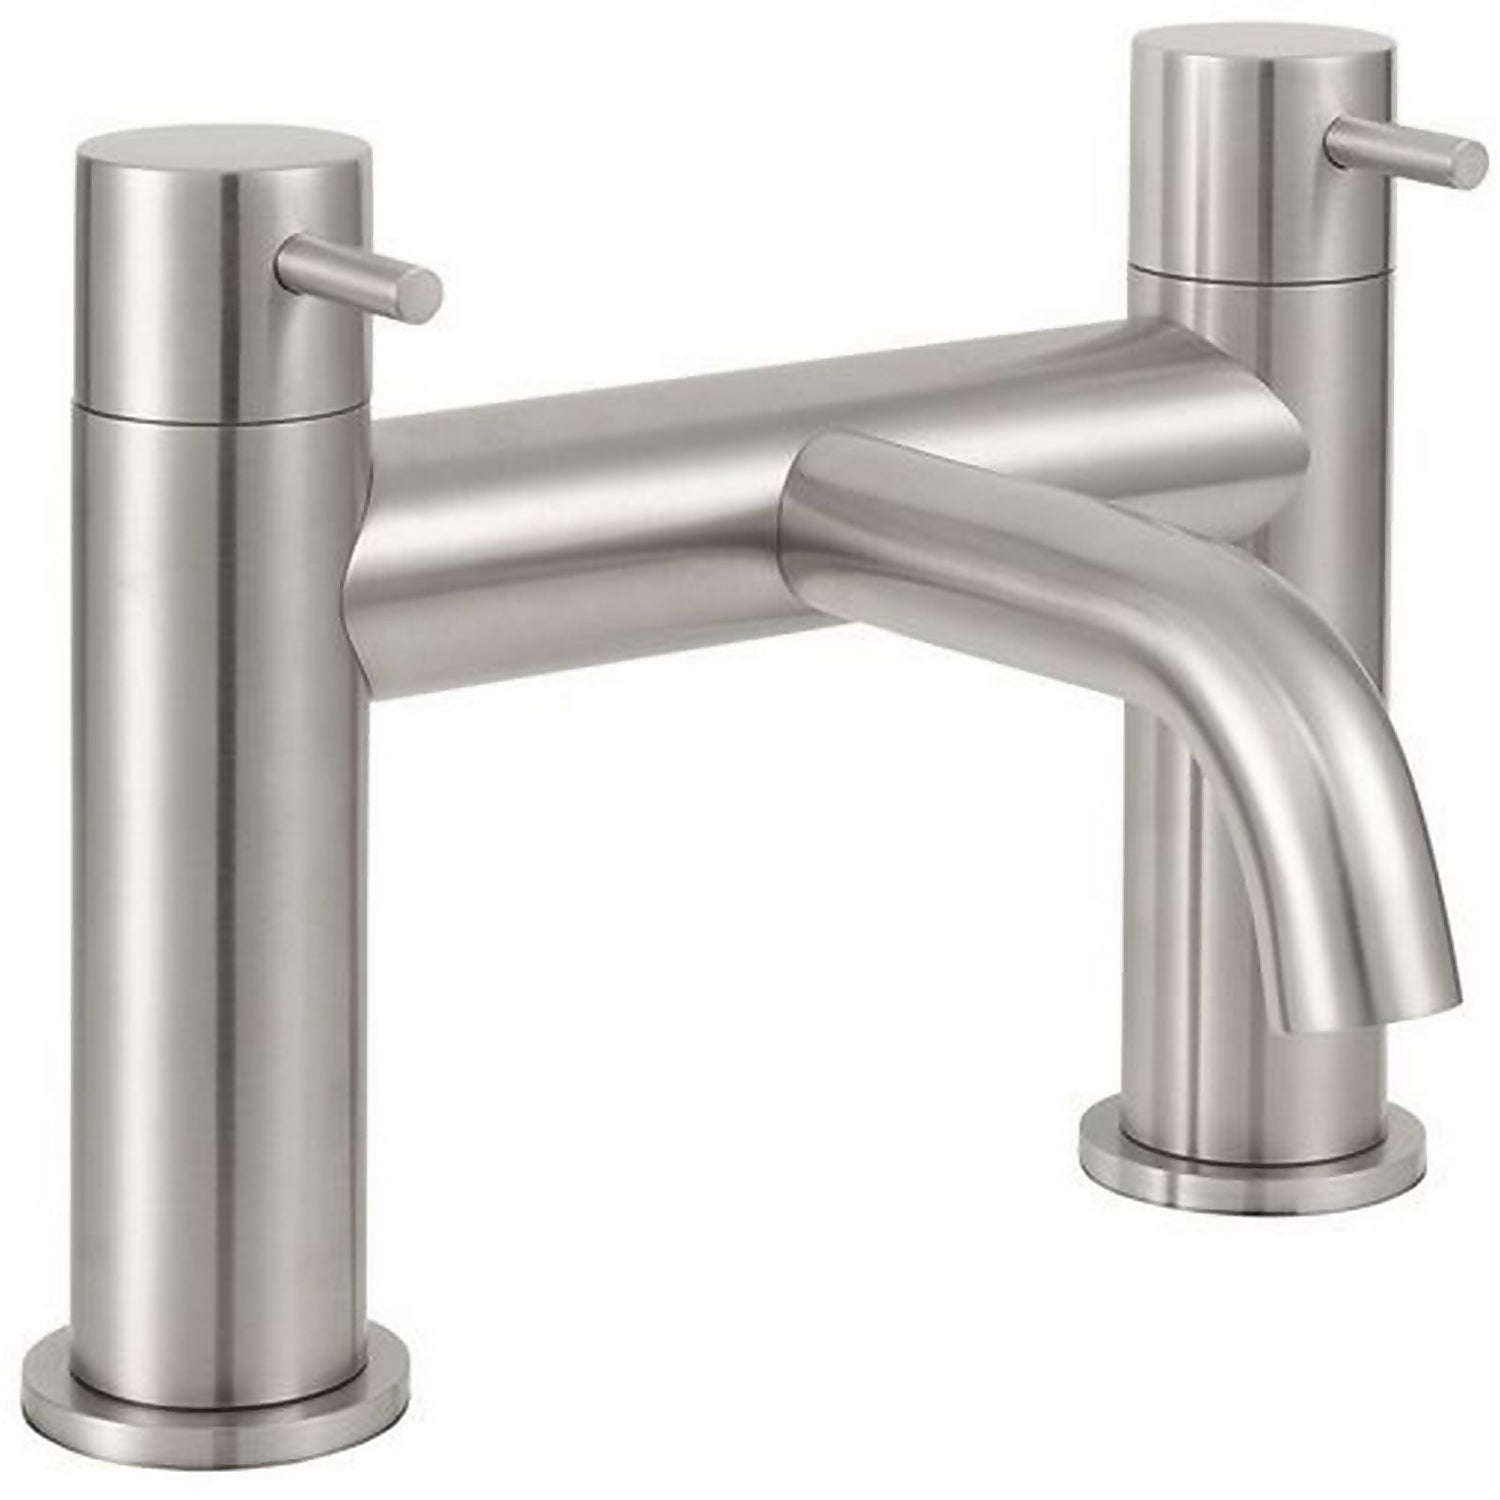 Forge Stainless Steel Deck Mounted Bath Tap